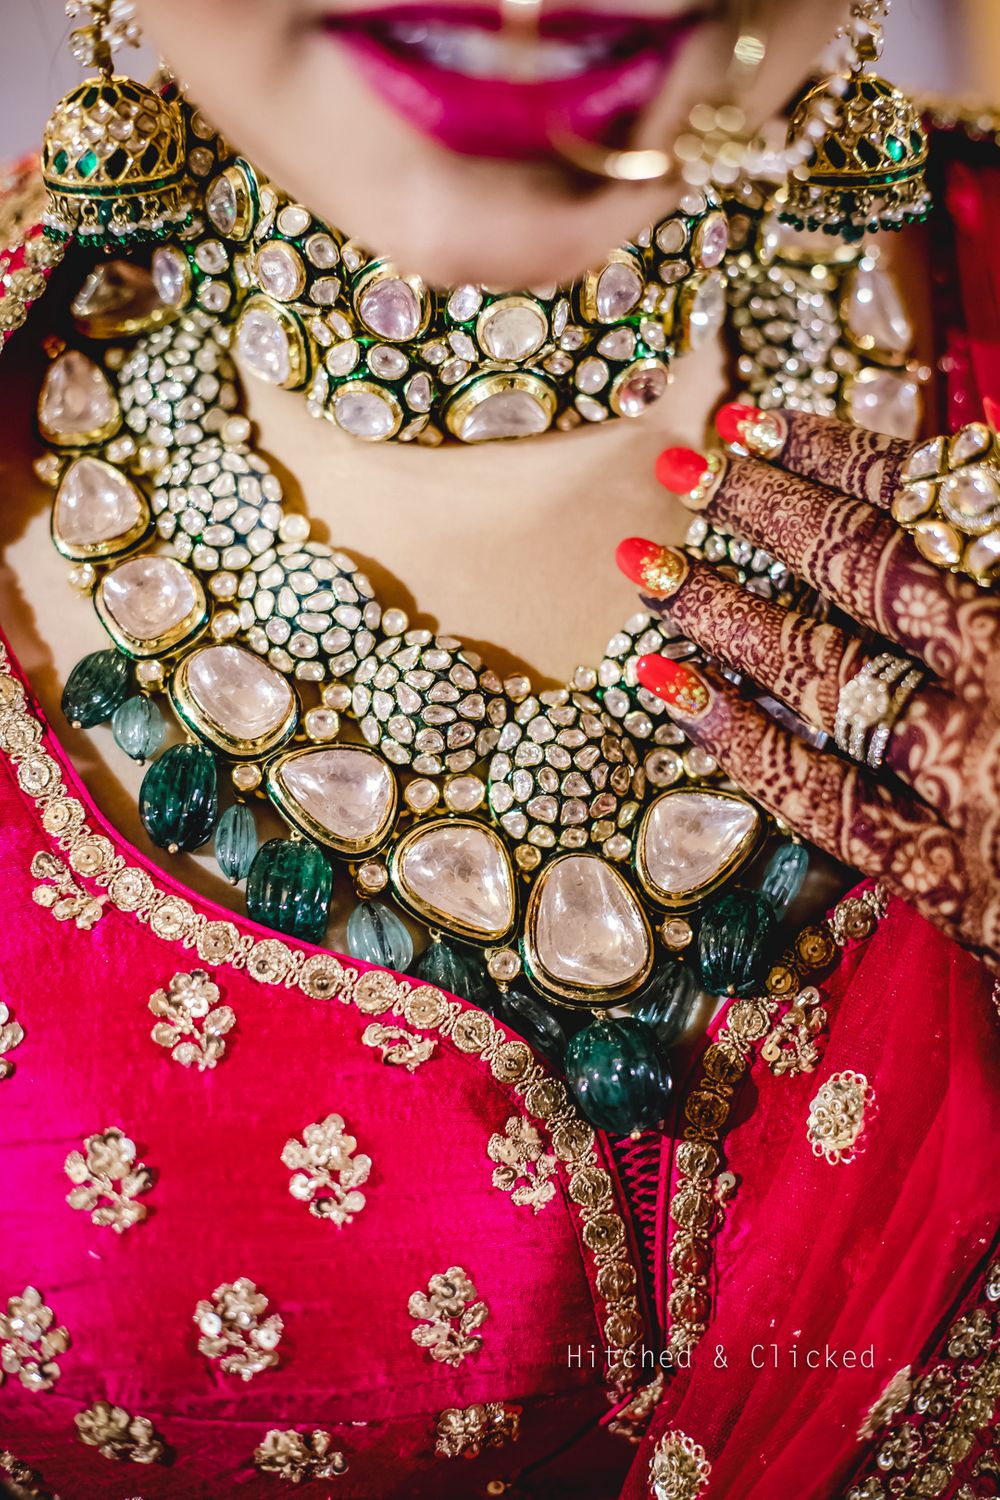 Photo of A close up shot of the bridal jewellery